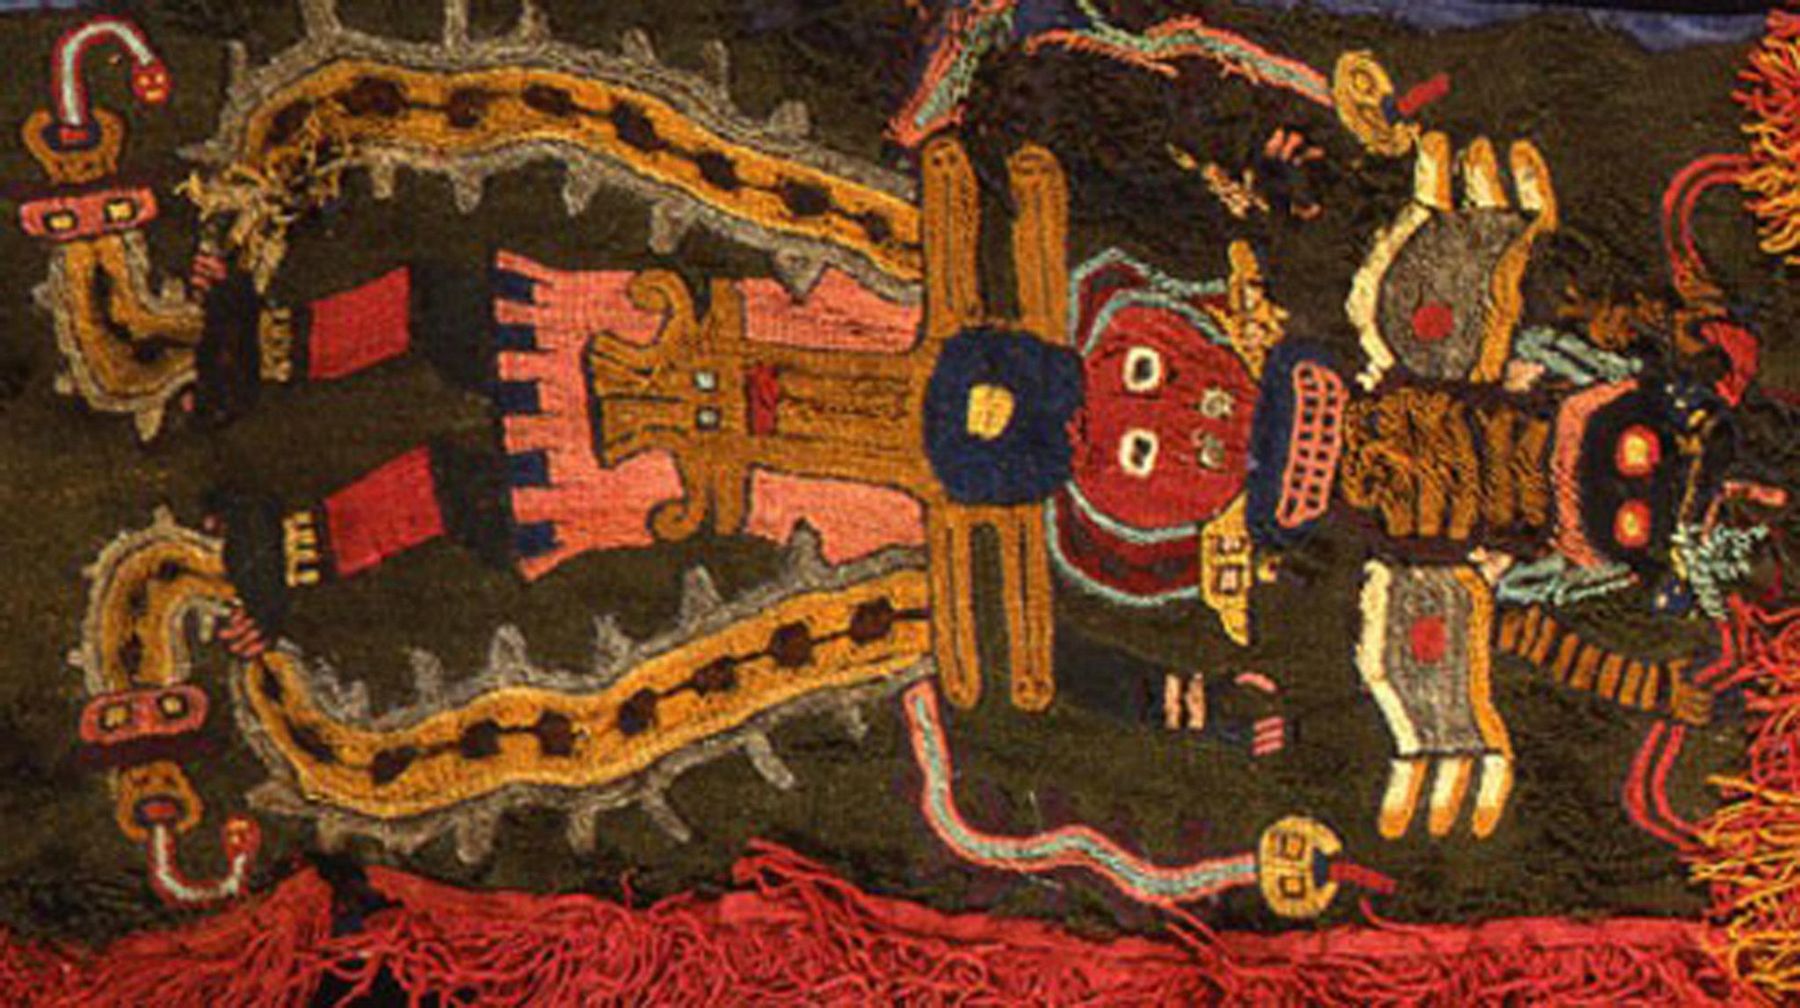 One of the ancient Paracas textiles to be returned by Sweden.